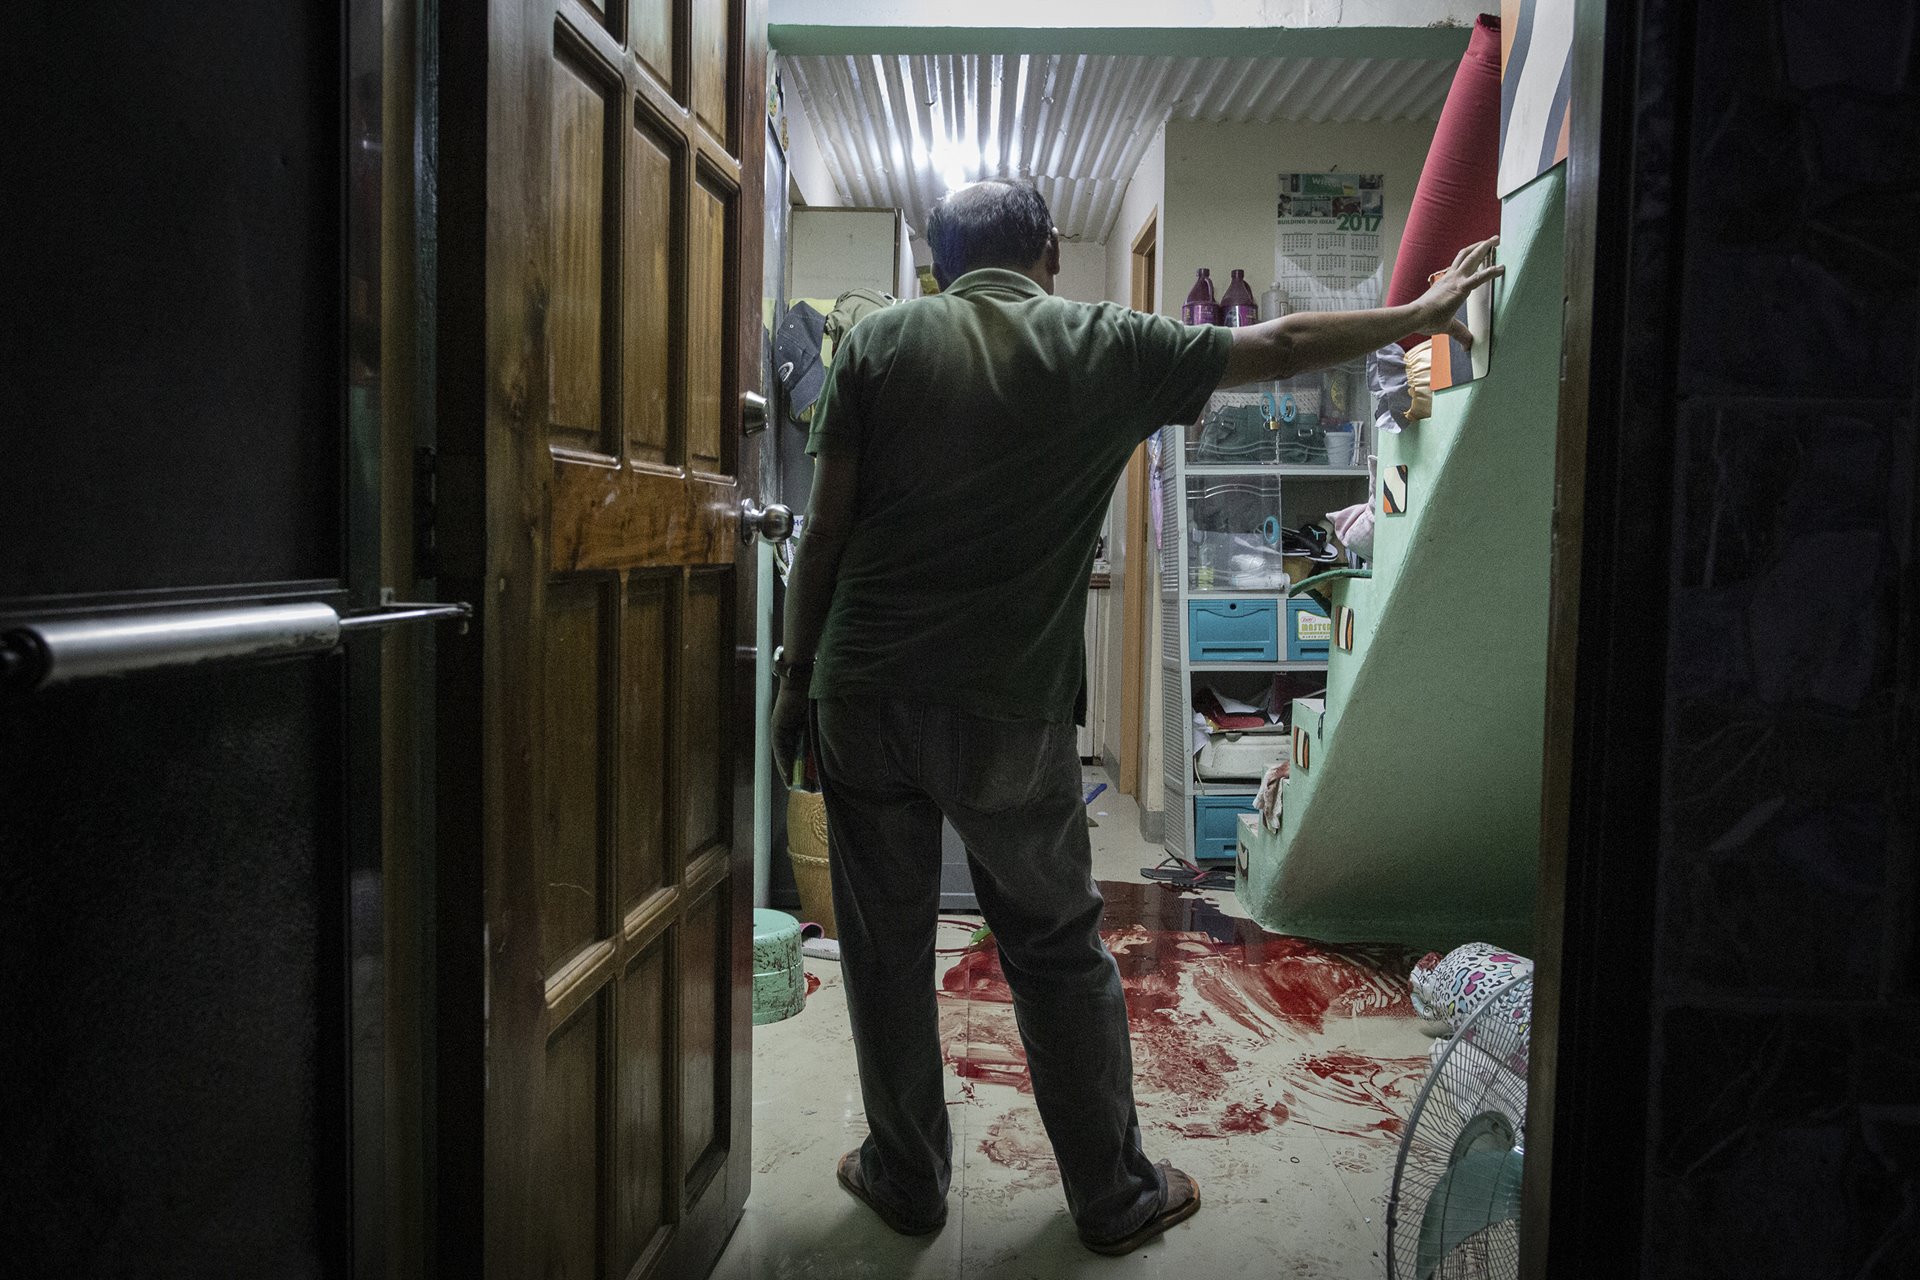 Marianito Libo-on surveys the room where his son Jomar, who worked as an electrician, was killed moments before, in Quezon City, the Philippines. Five masked men barged into Jomar Libo-on&rsquo;s home as he was watching TV, and shot him in front of his wife, son and daughters.